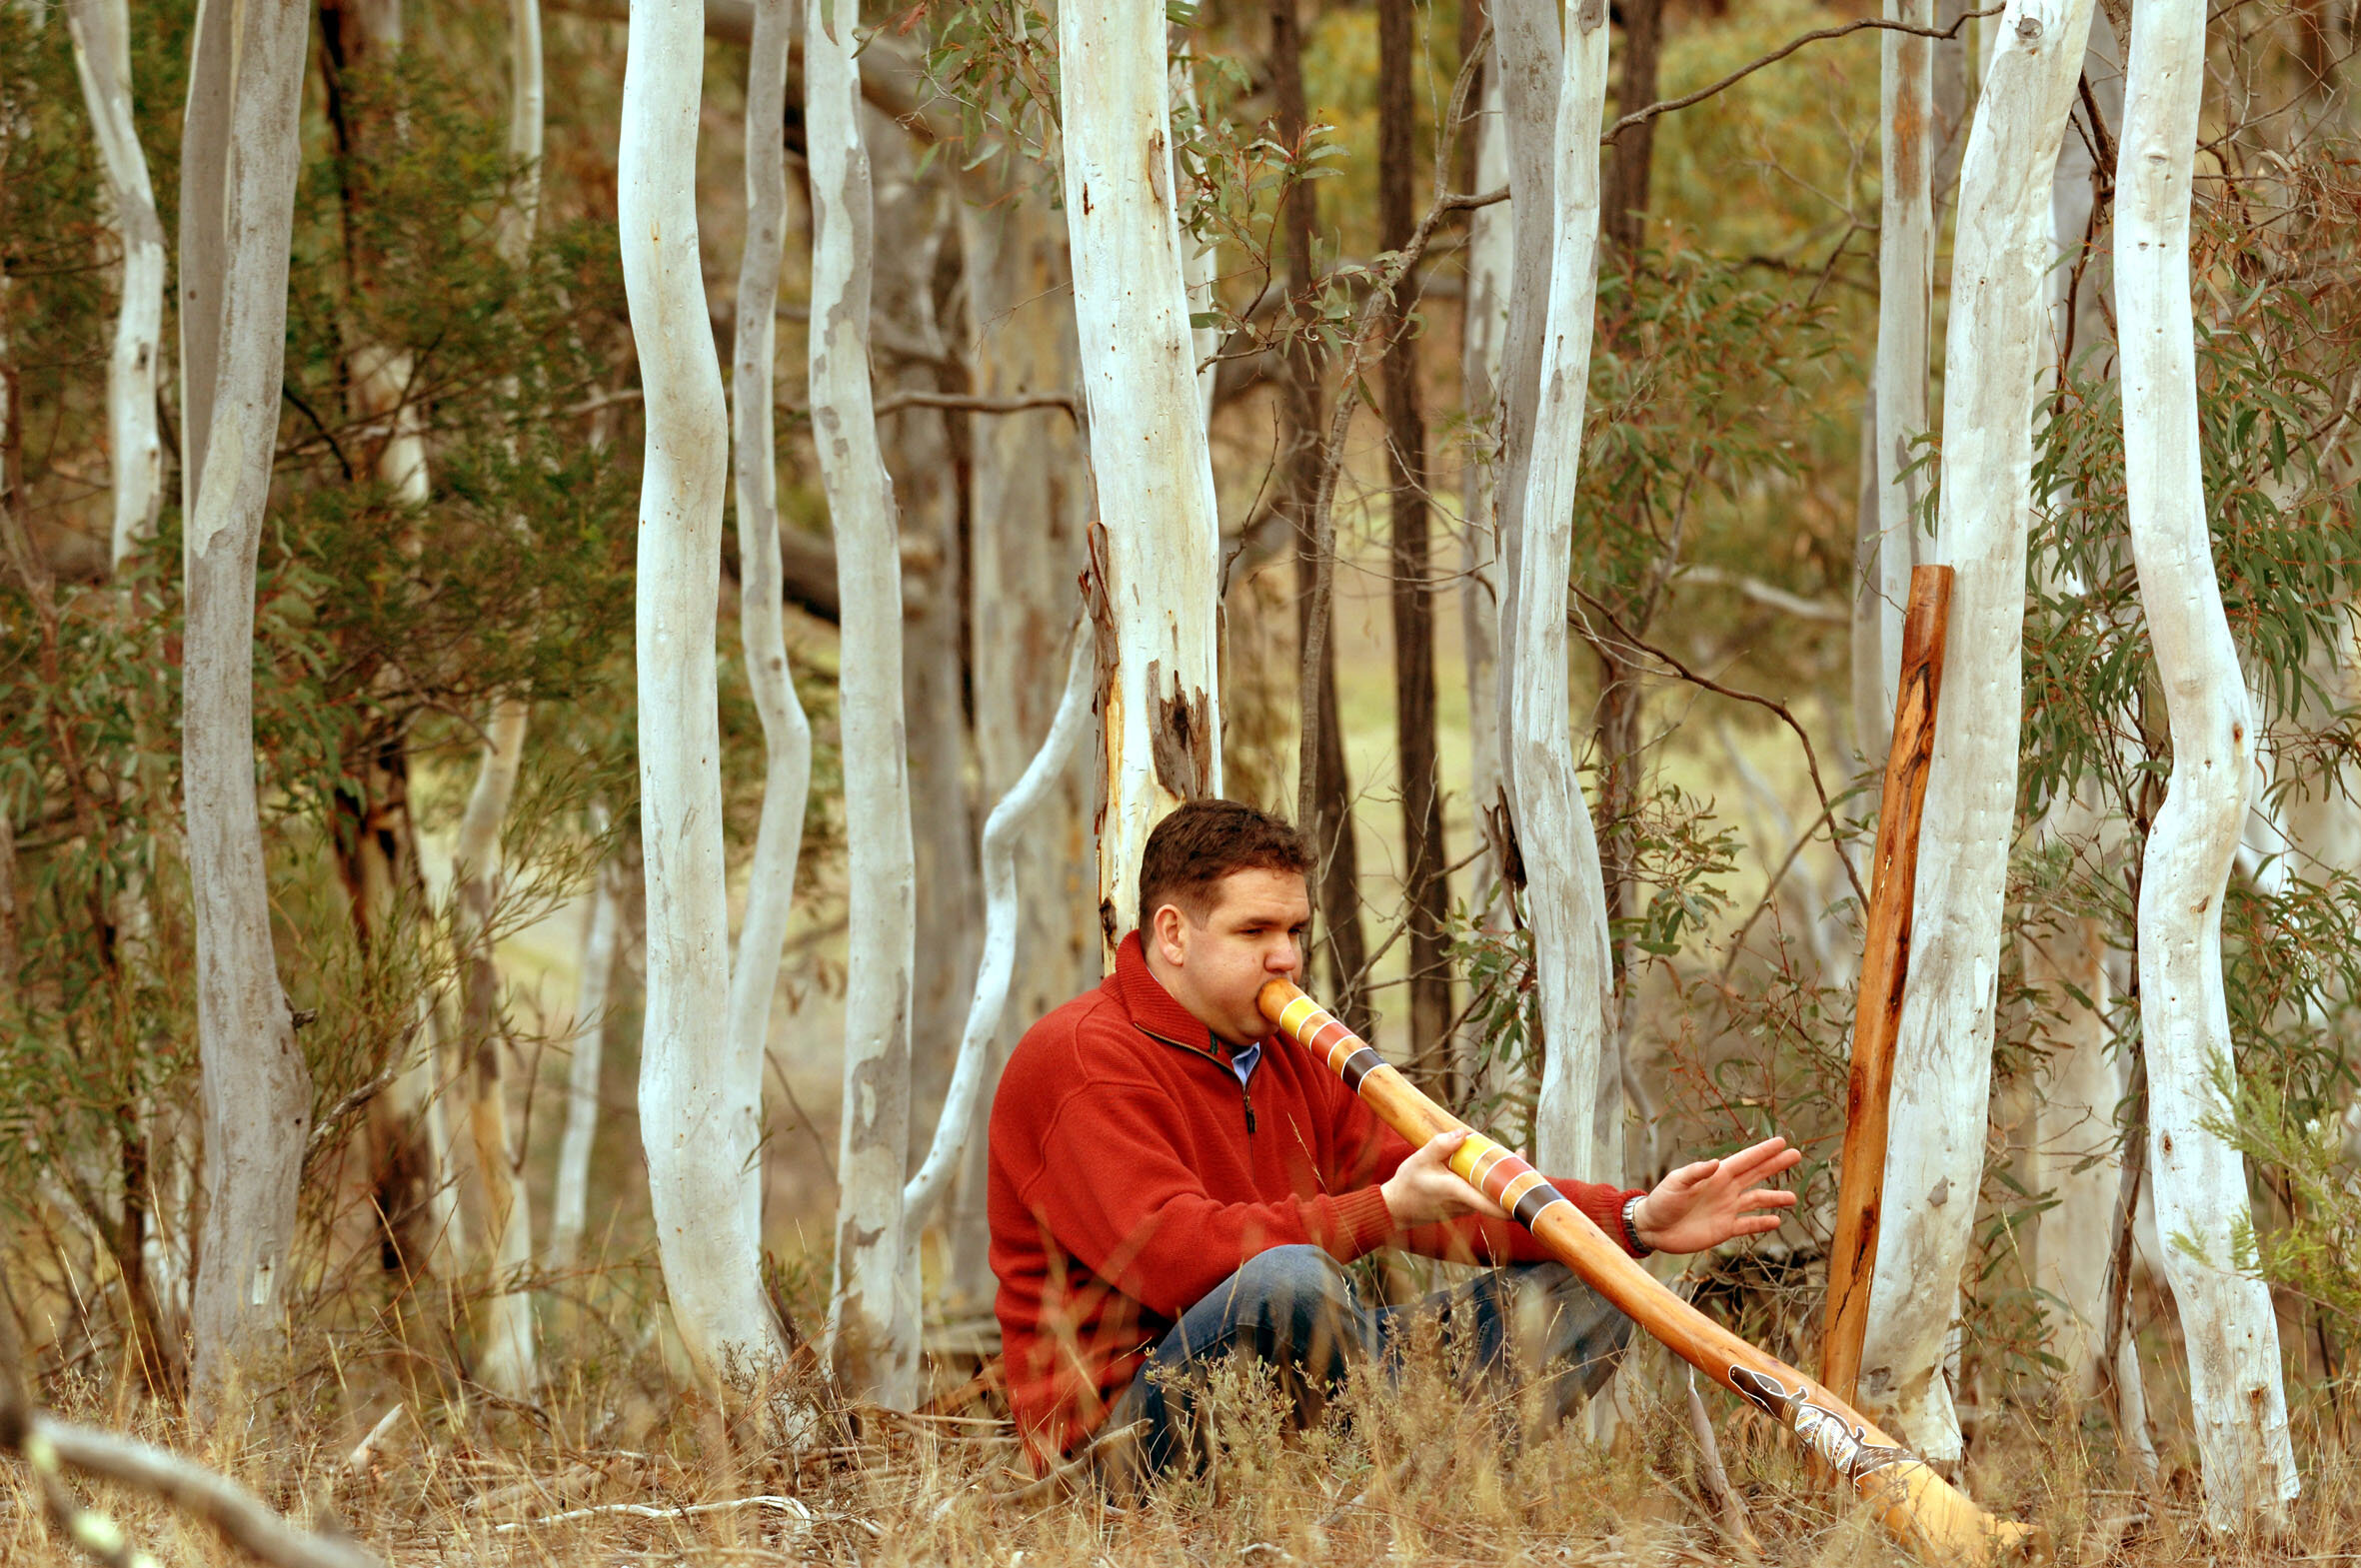 Picking up good vibrations: The surprising physics of the didgeridoo